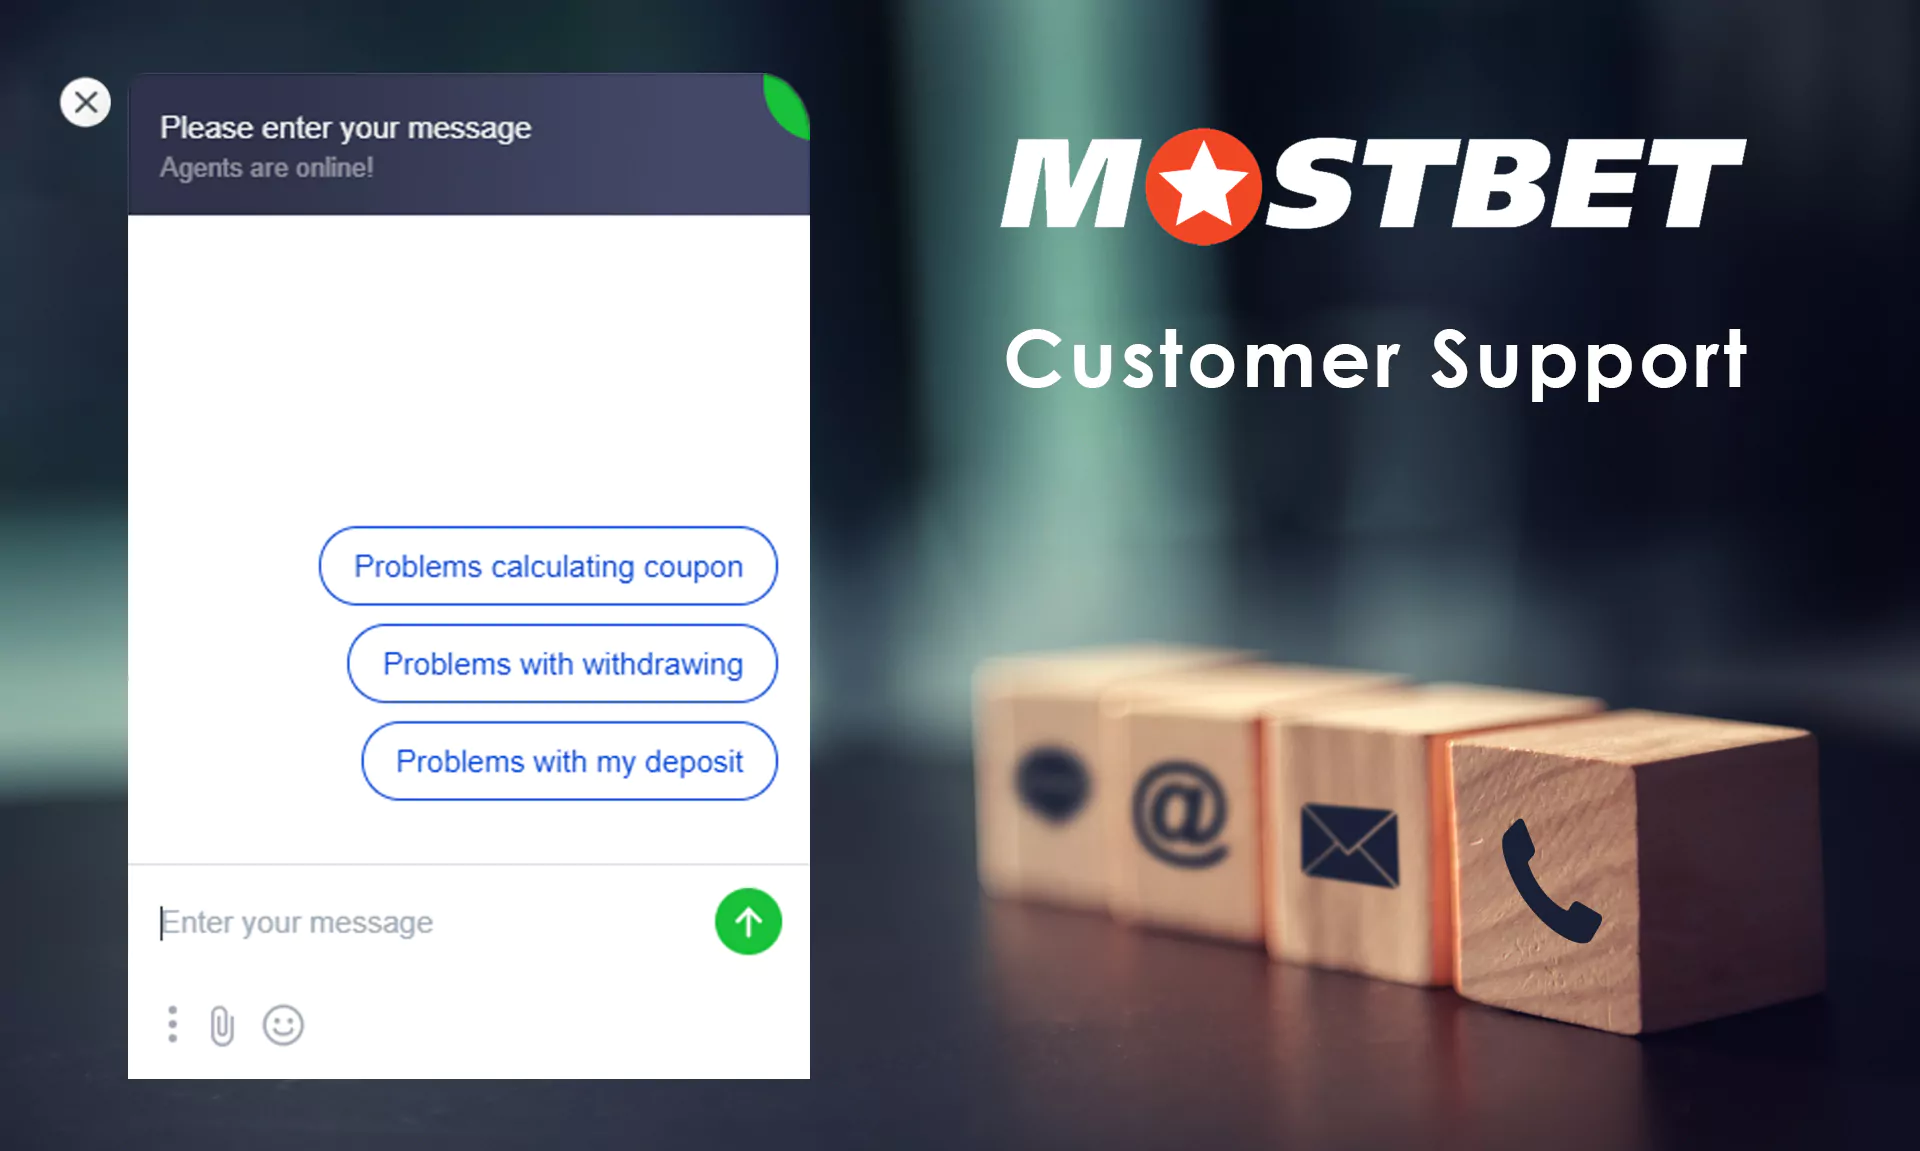 In case you have any problem write to chat of Mostbet.